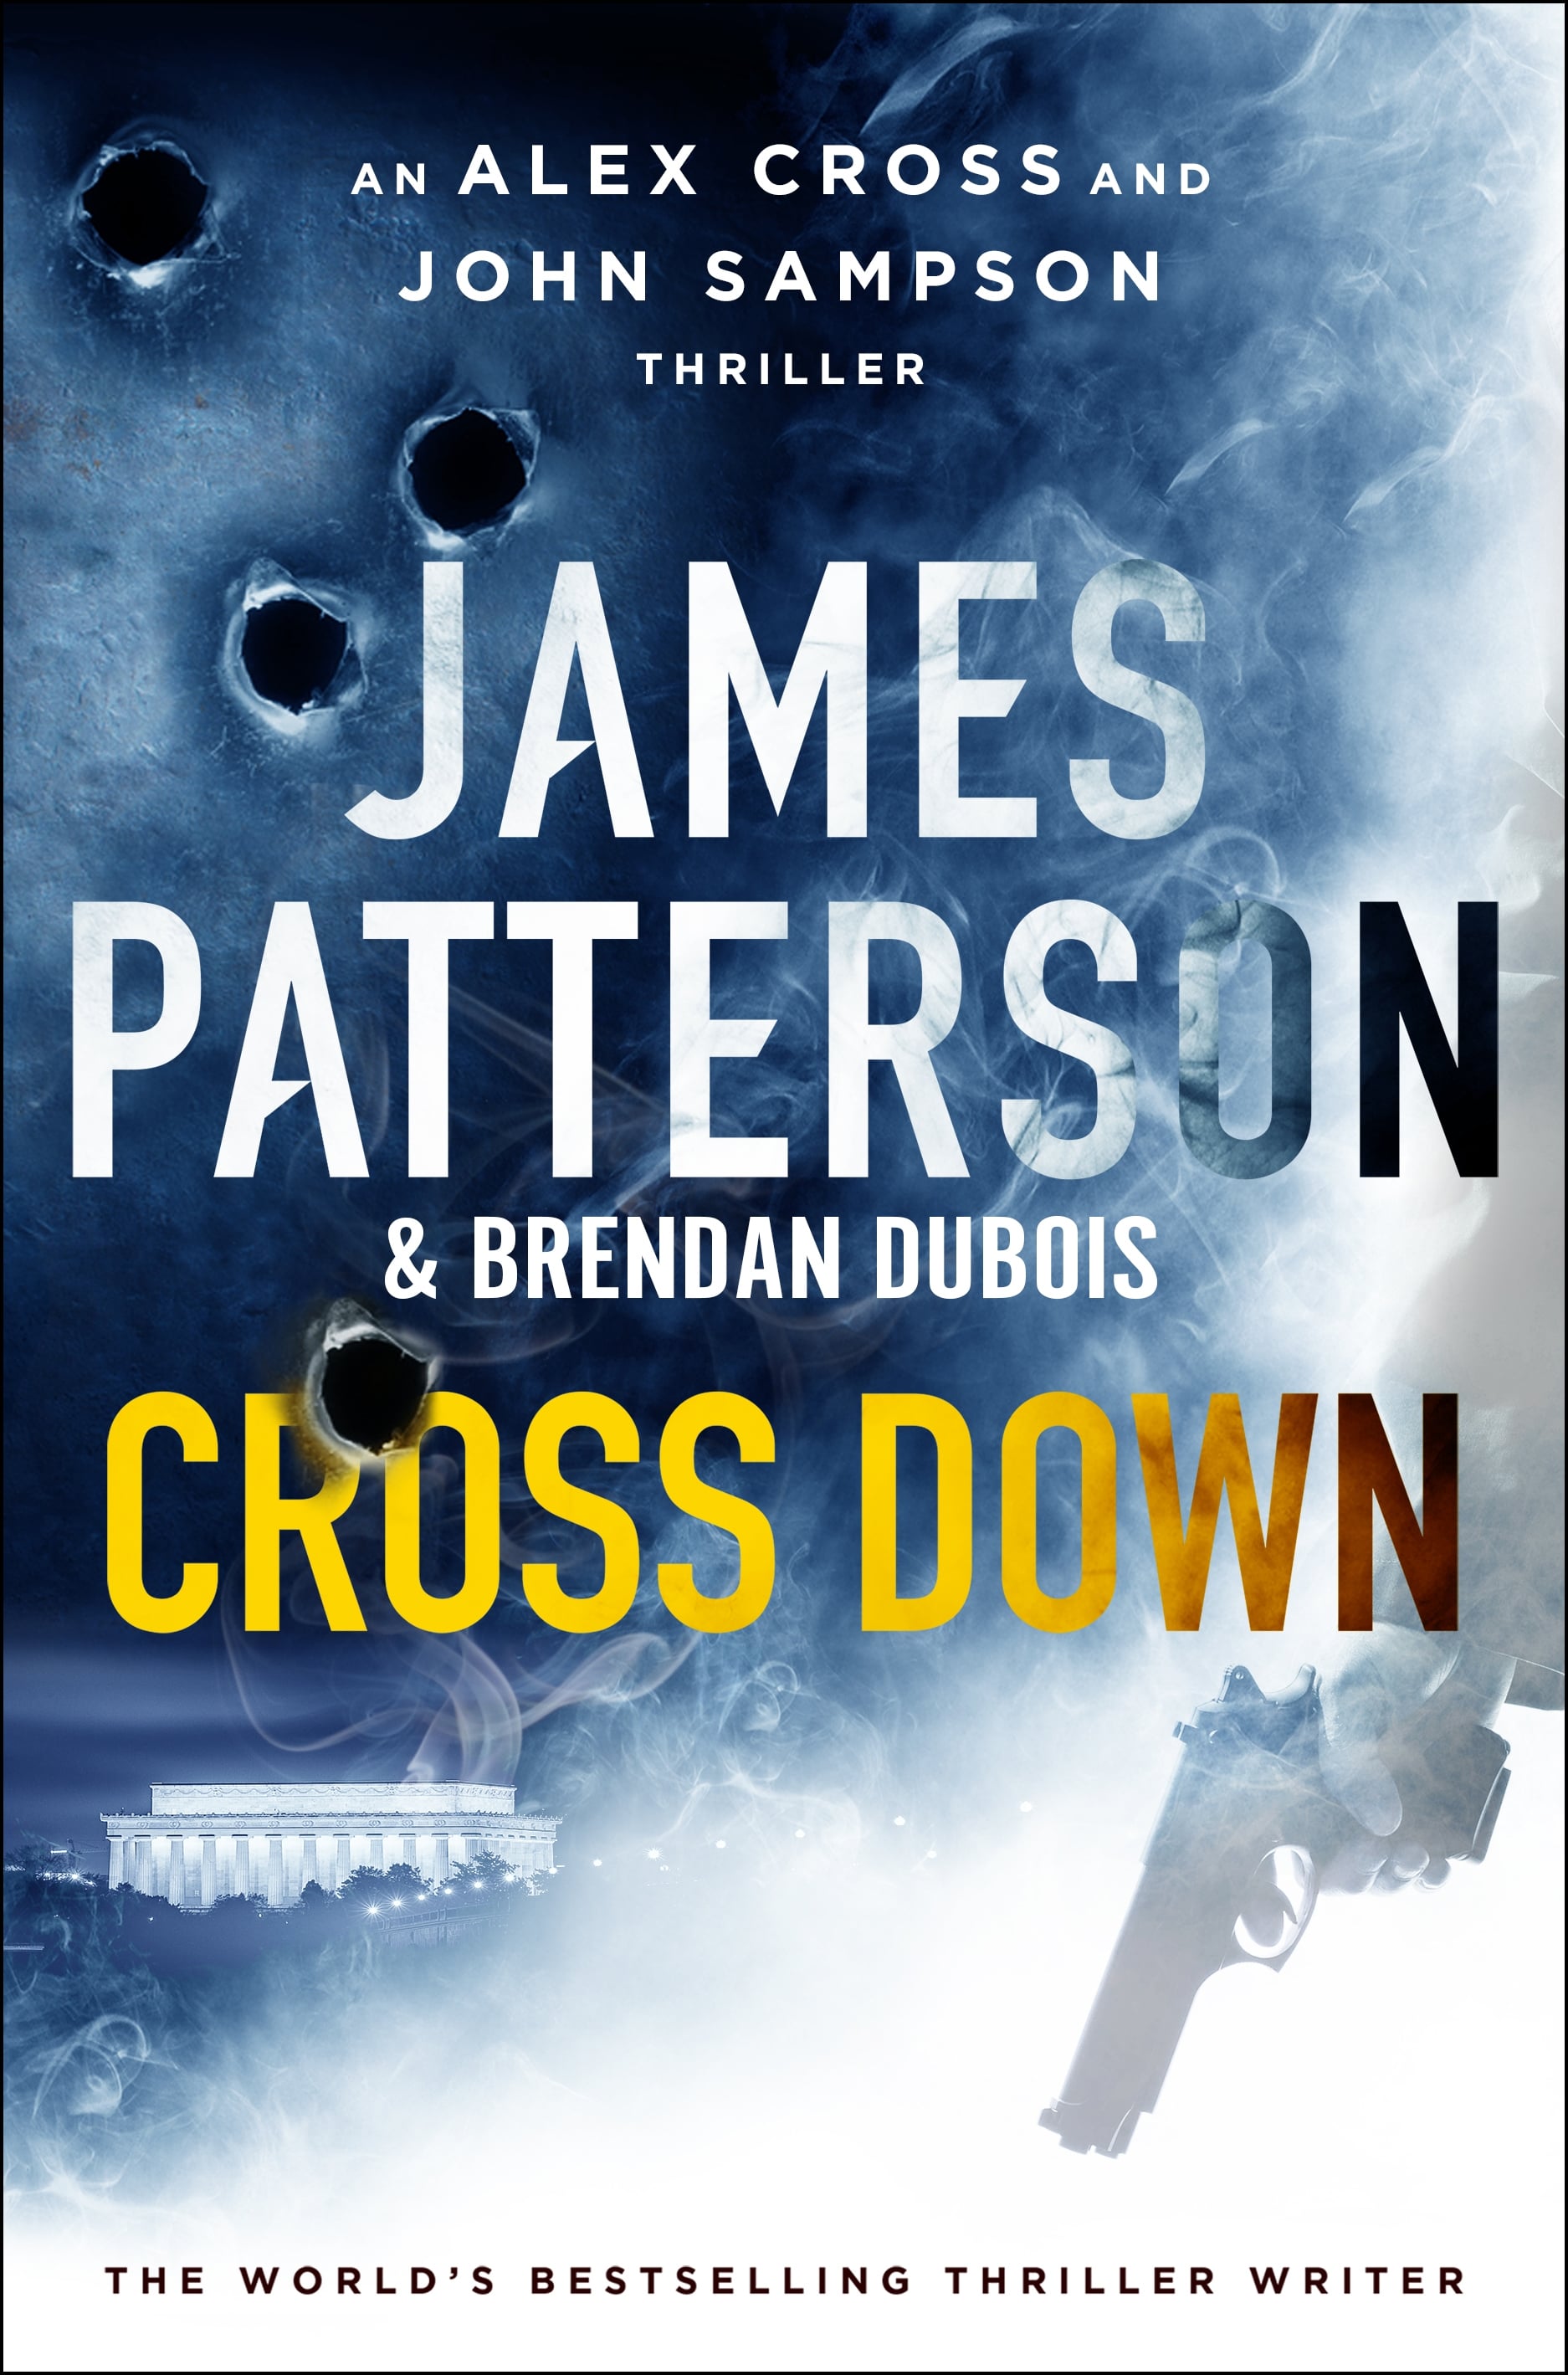 Book jacket of Cross Down by James Patterson